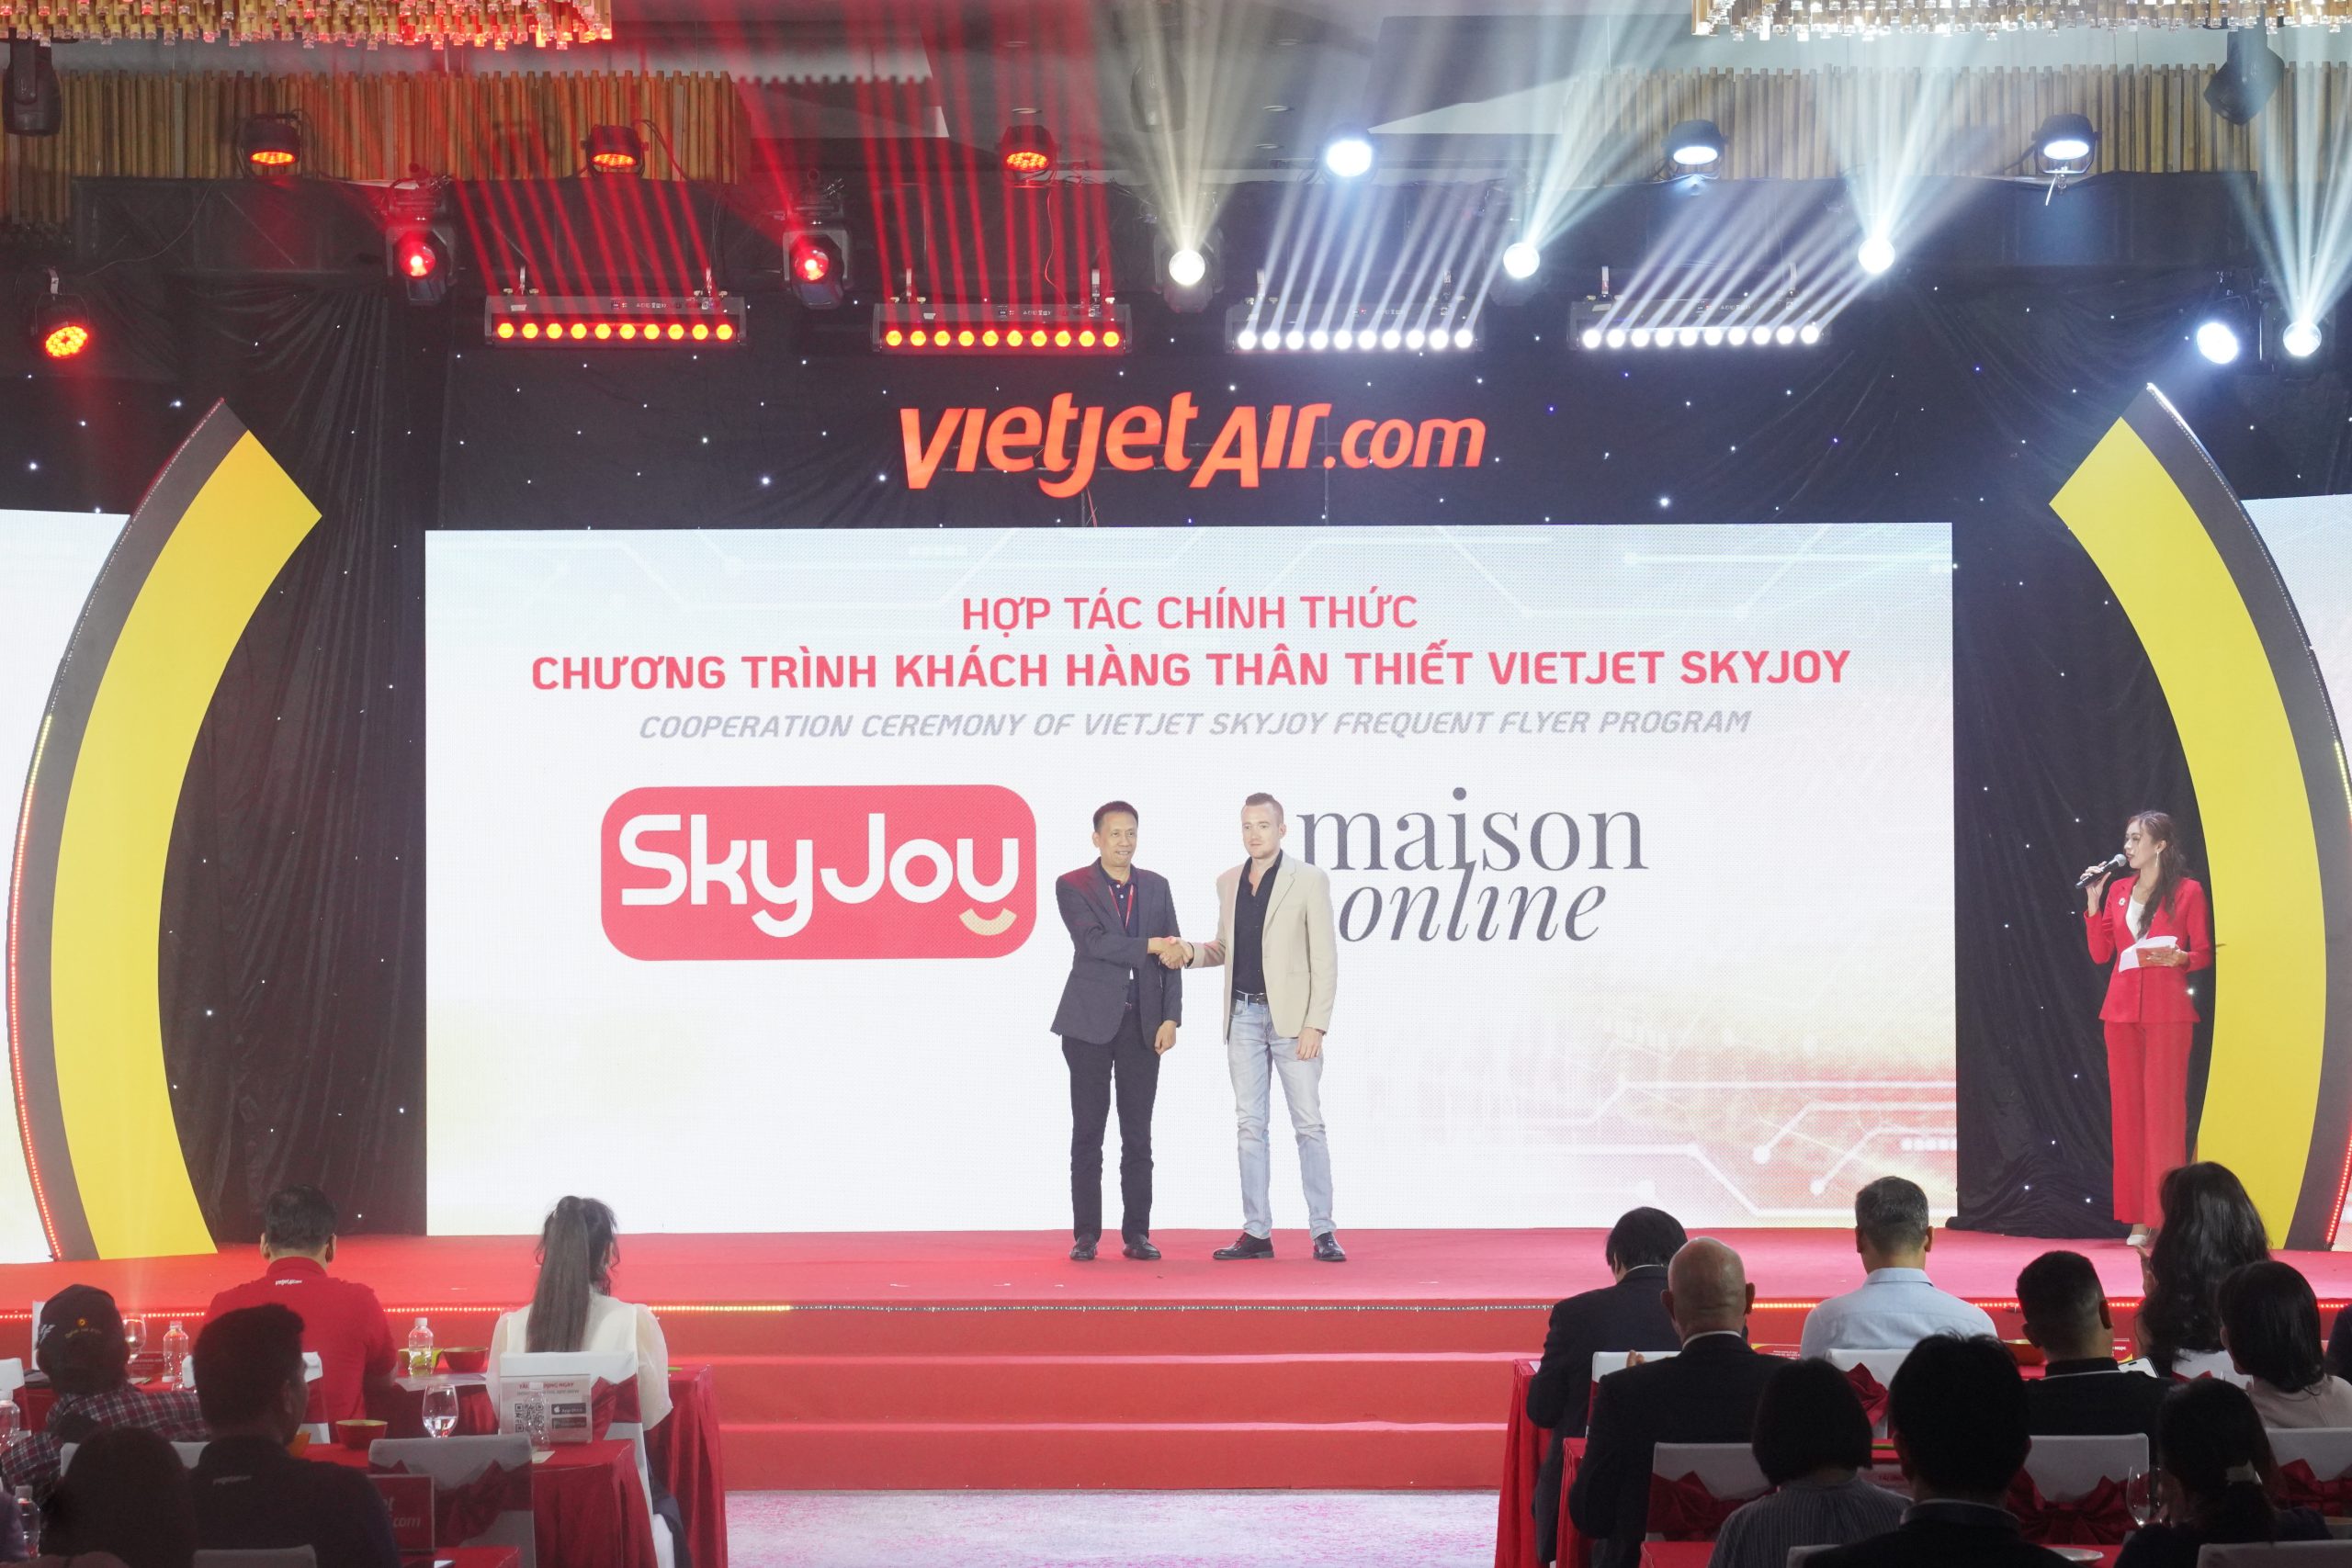 SkyJoy: Vietjet Air cooperates with Maison Online